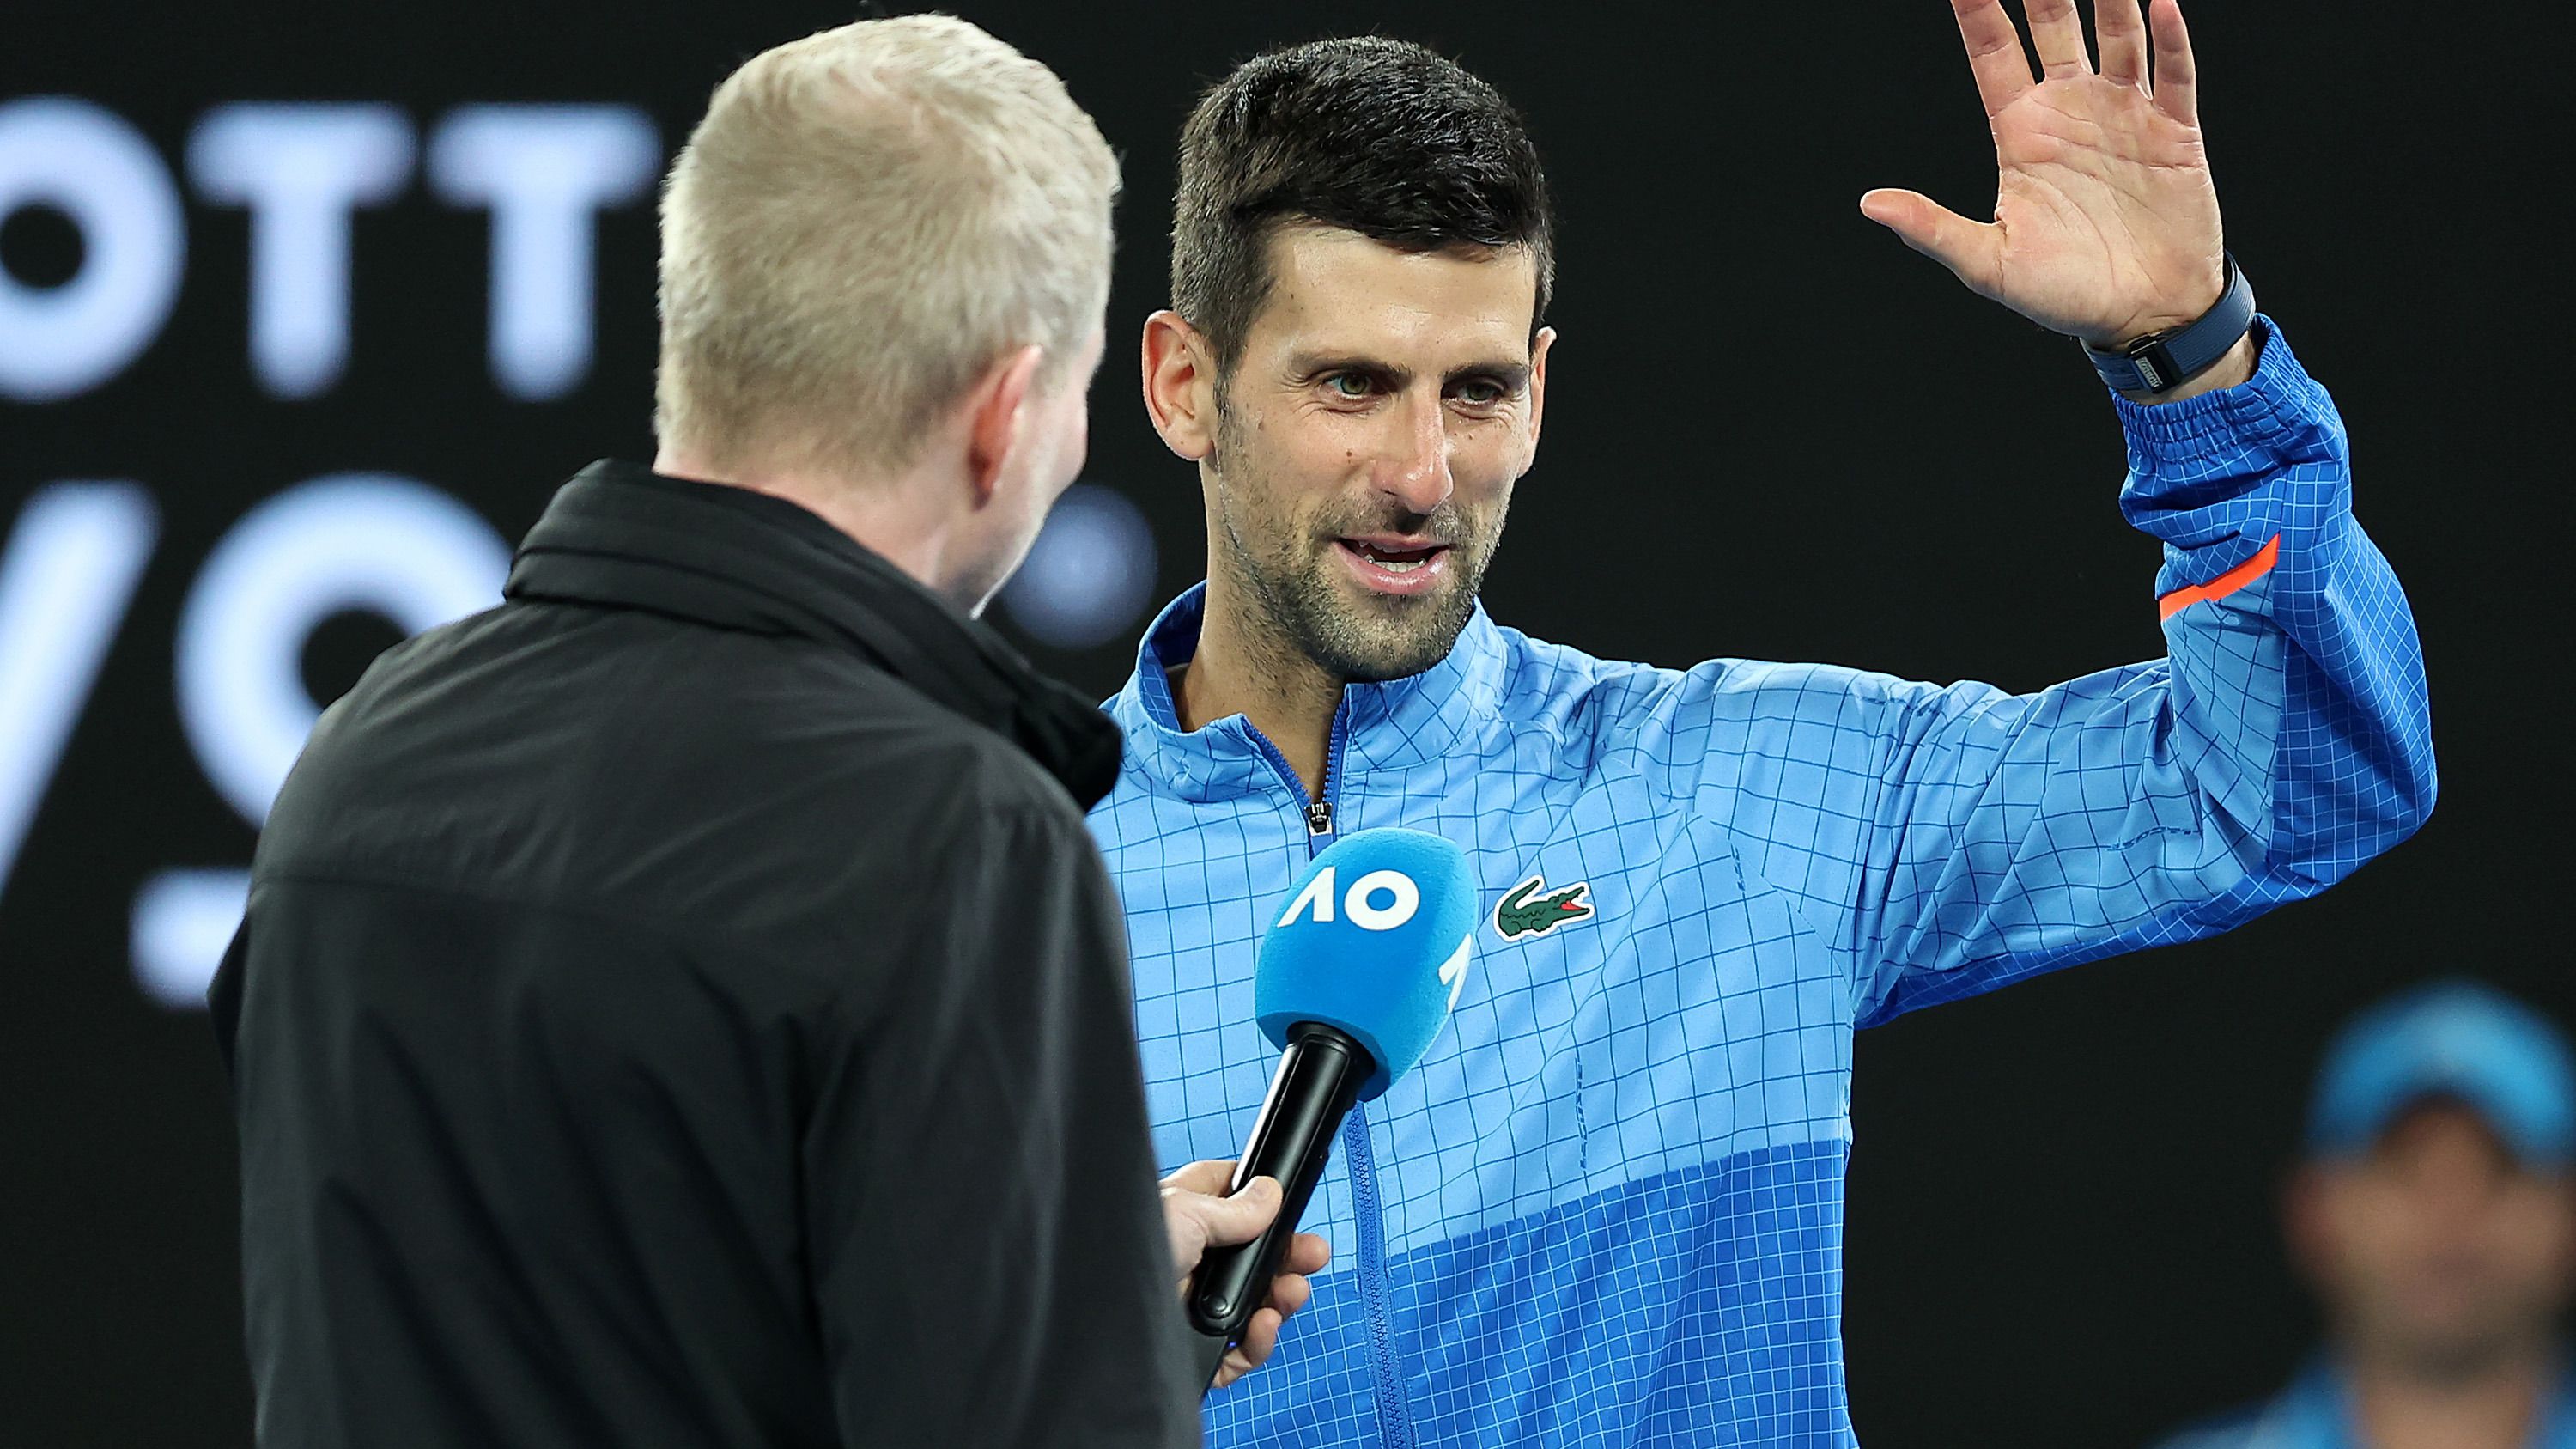 Novak Djokovic of Serbia is interviewed by Jim Courier after his quarter final. (Photo by Cameron Spencer/Getty Images)